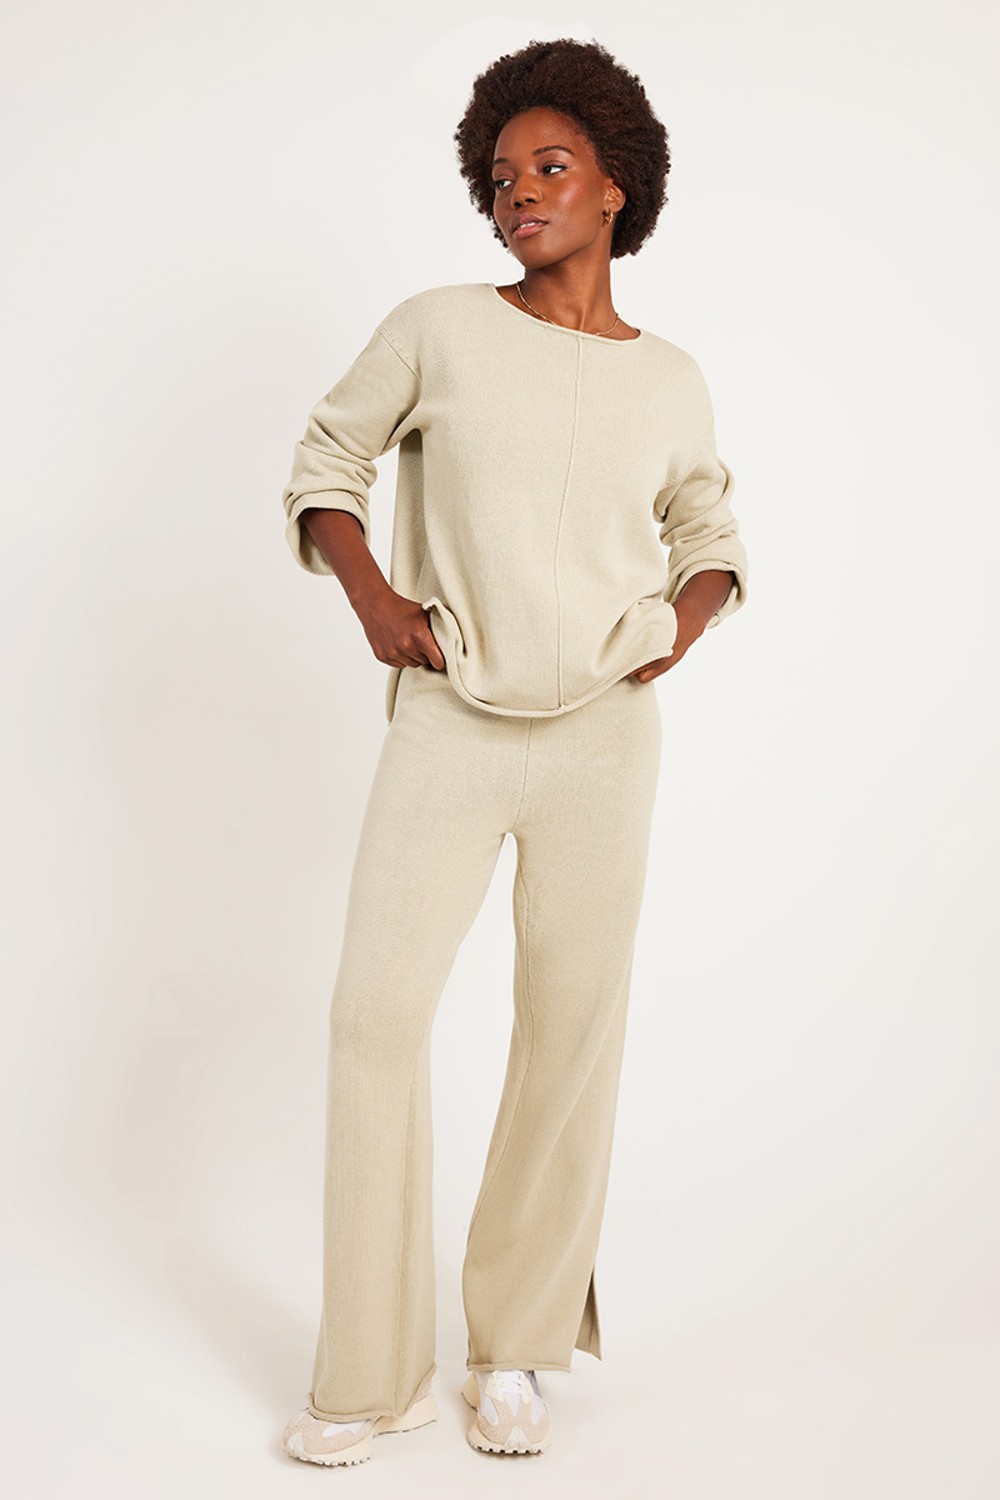 Nude Lucy Lilou Knit Pant Cucumber | Stylerunner